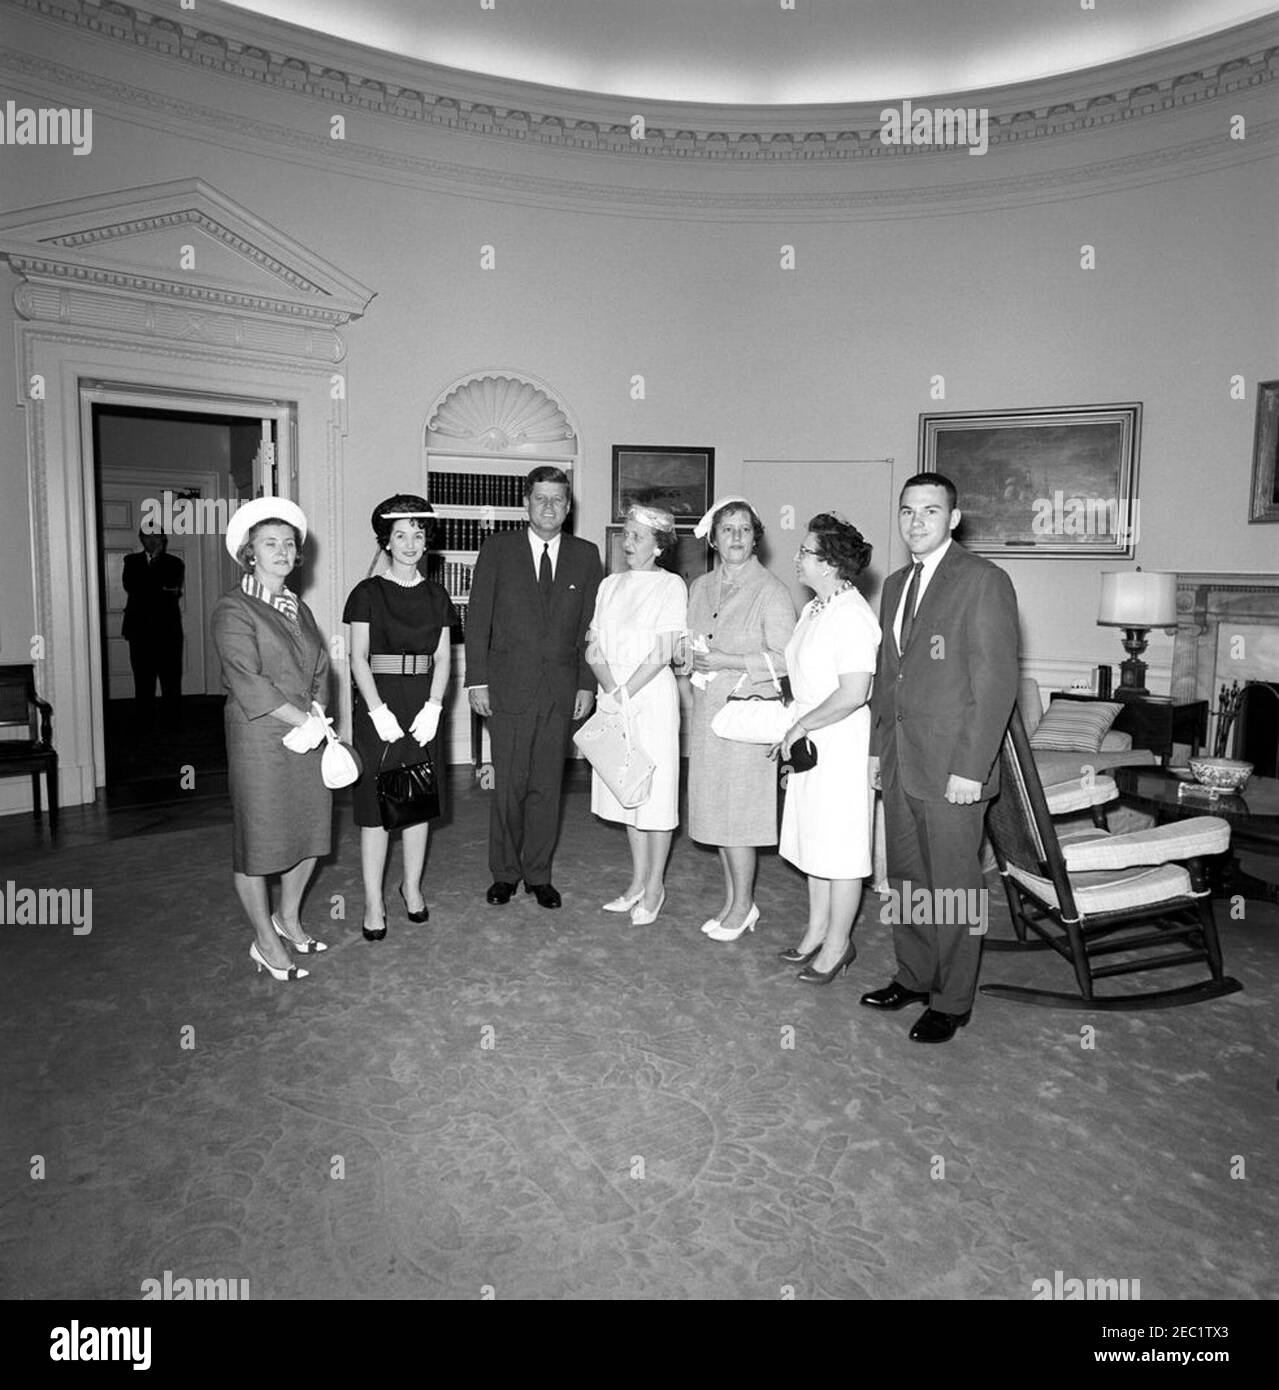 Visit of wives of Ohio newspaper publishers, 12:30PM. President John F. Kennedy visits with wives of newspaper publishers from Ohio. Those present include: Helen Dix, Evelyn M. Cook, Lucile A. Troyer, Josephine Sicuro, and Ruth Fairchild. Special Assistant to the President, Kenneth P. Ou2019Donnell, stands in background (through doorway). Oval Office, White House, Washington, D.C. Stock Photo